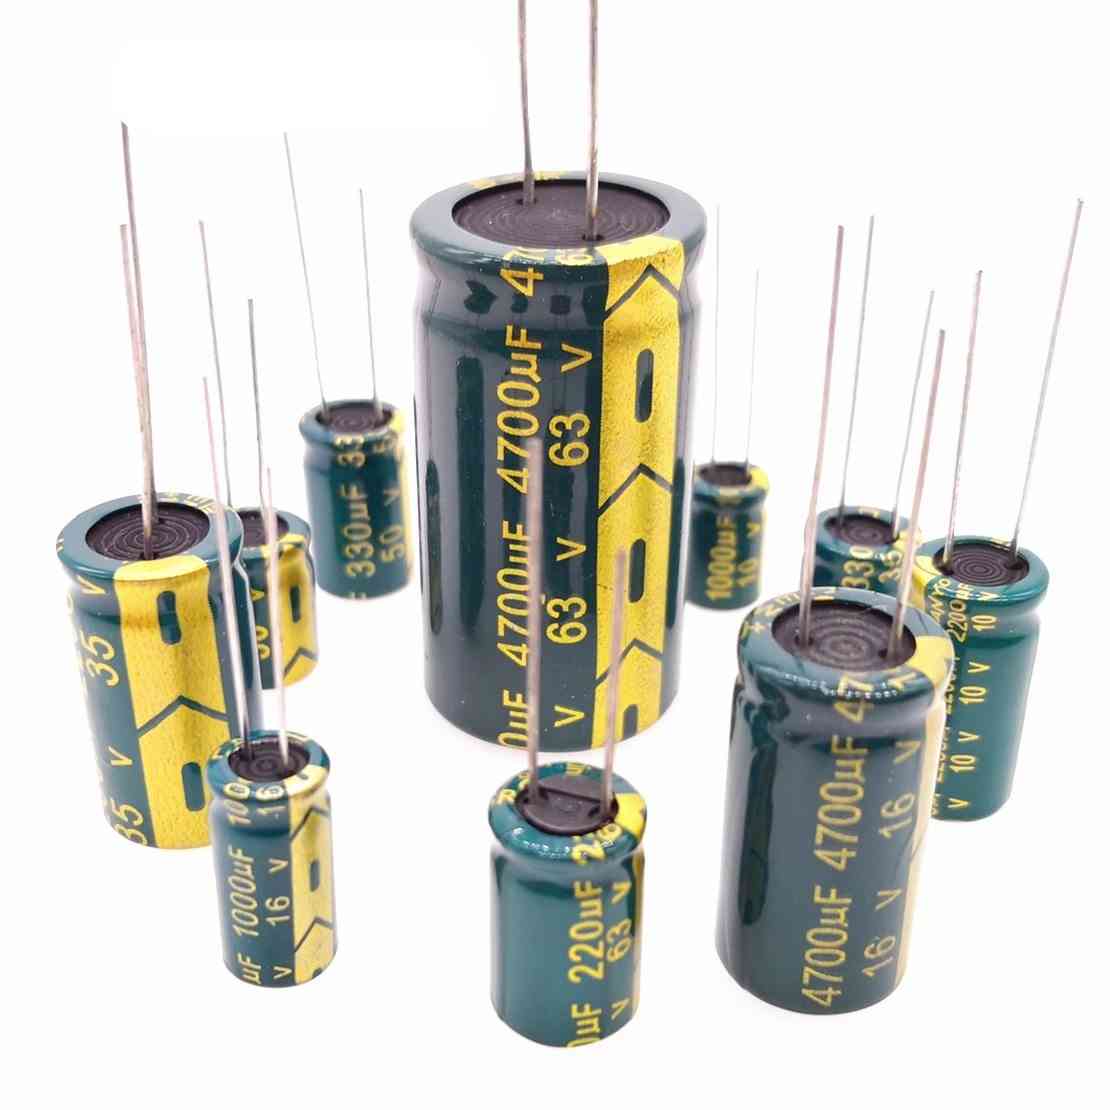 2-100pcs, High Frequency Capacitor